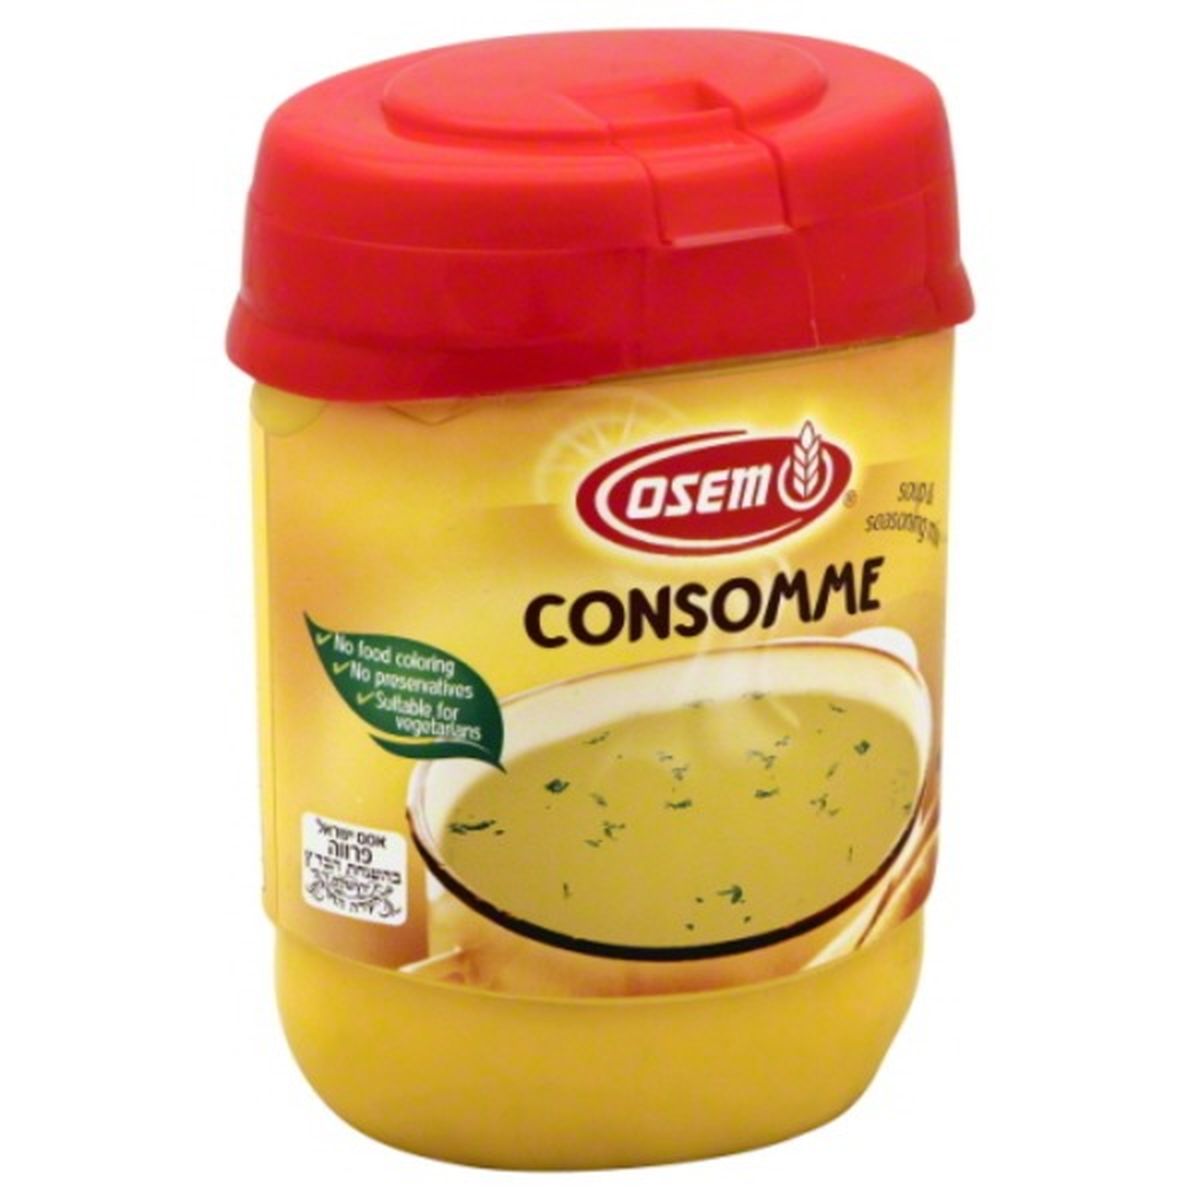 Calories in Osem Consomme